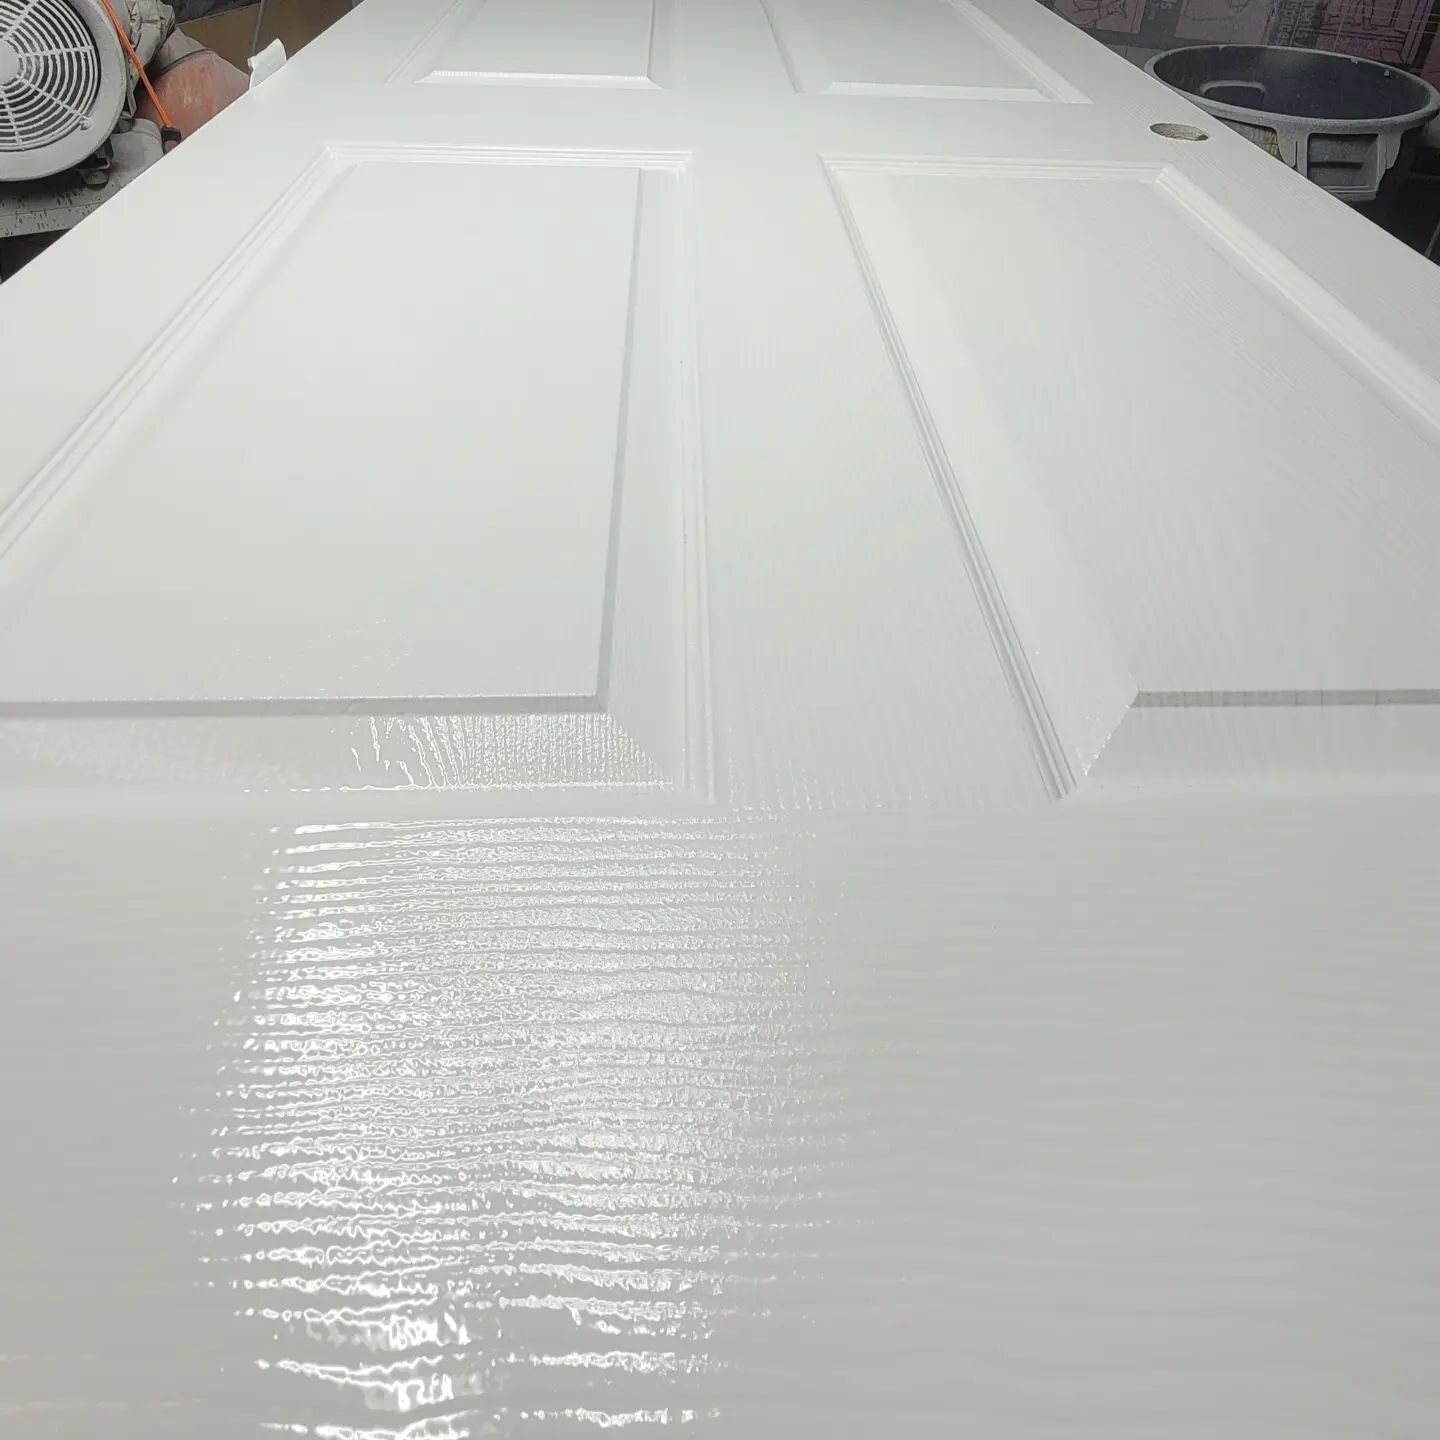 While I'm at it. May as well post another one of this week's completed projects. This dusty looking primed door from Home Depot has been &quot;Command-ed&quot; by me to be gloss white. Command is a urethane paint brand under the Corontech label made 